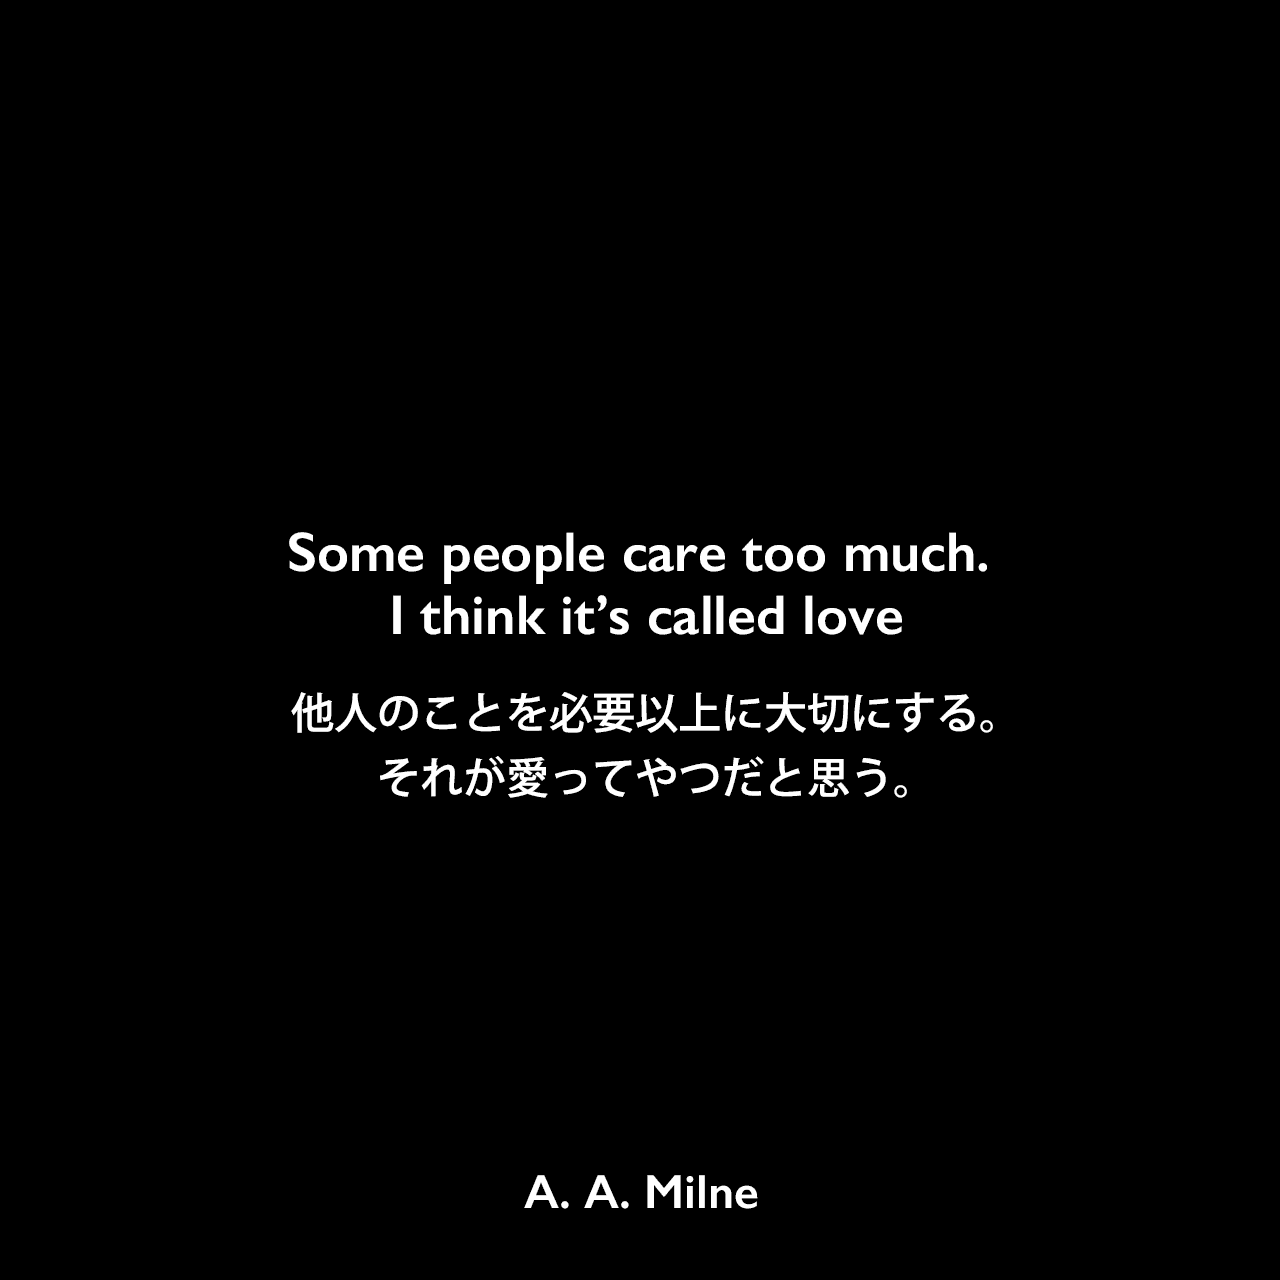 Some people care too much. I think it’s called love他人のことを必要以上に大切にする。 それが愛ってやつだと思う。A. A. Milne